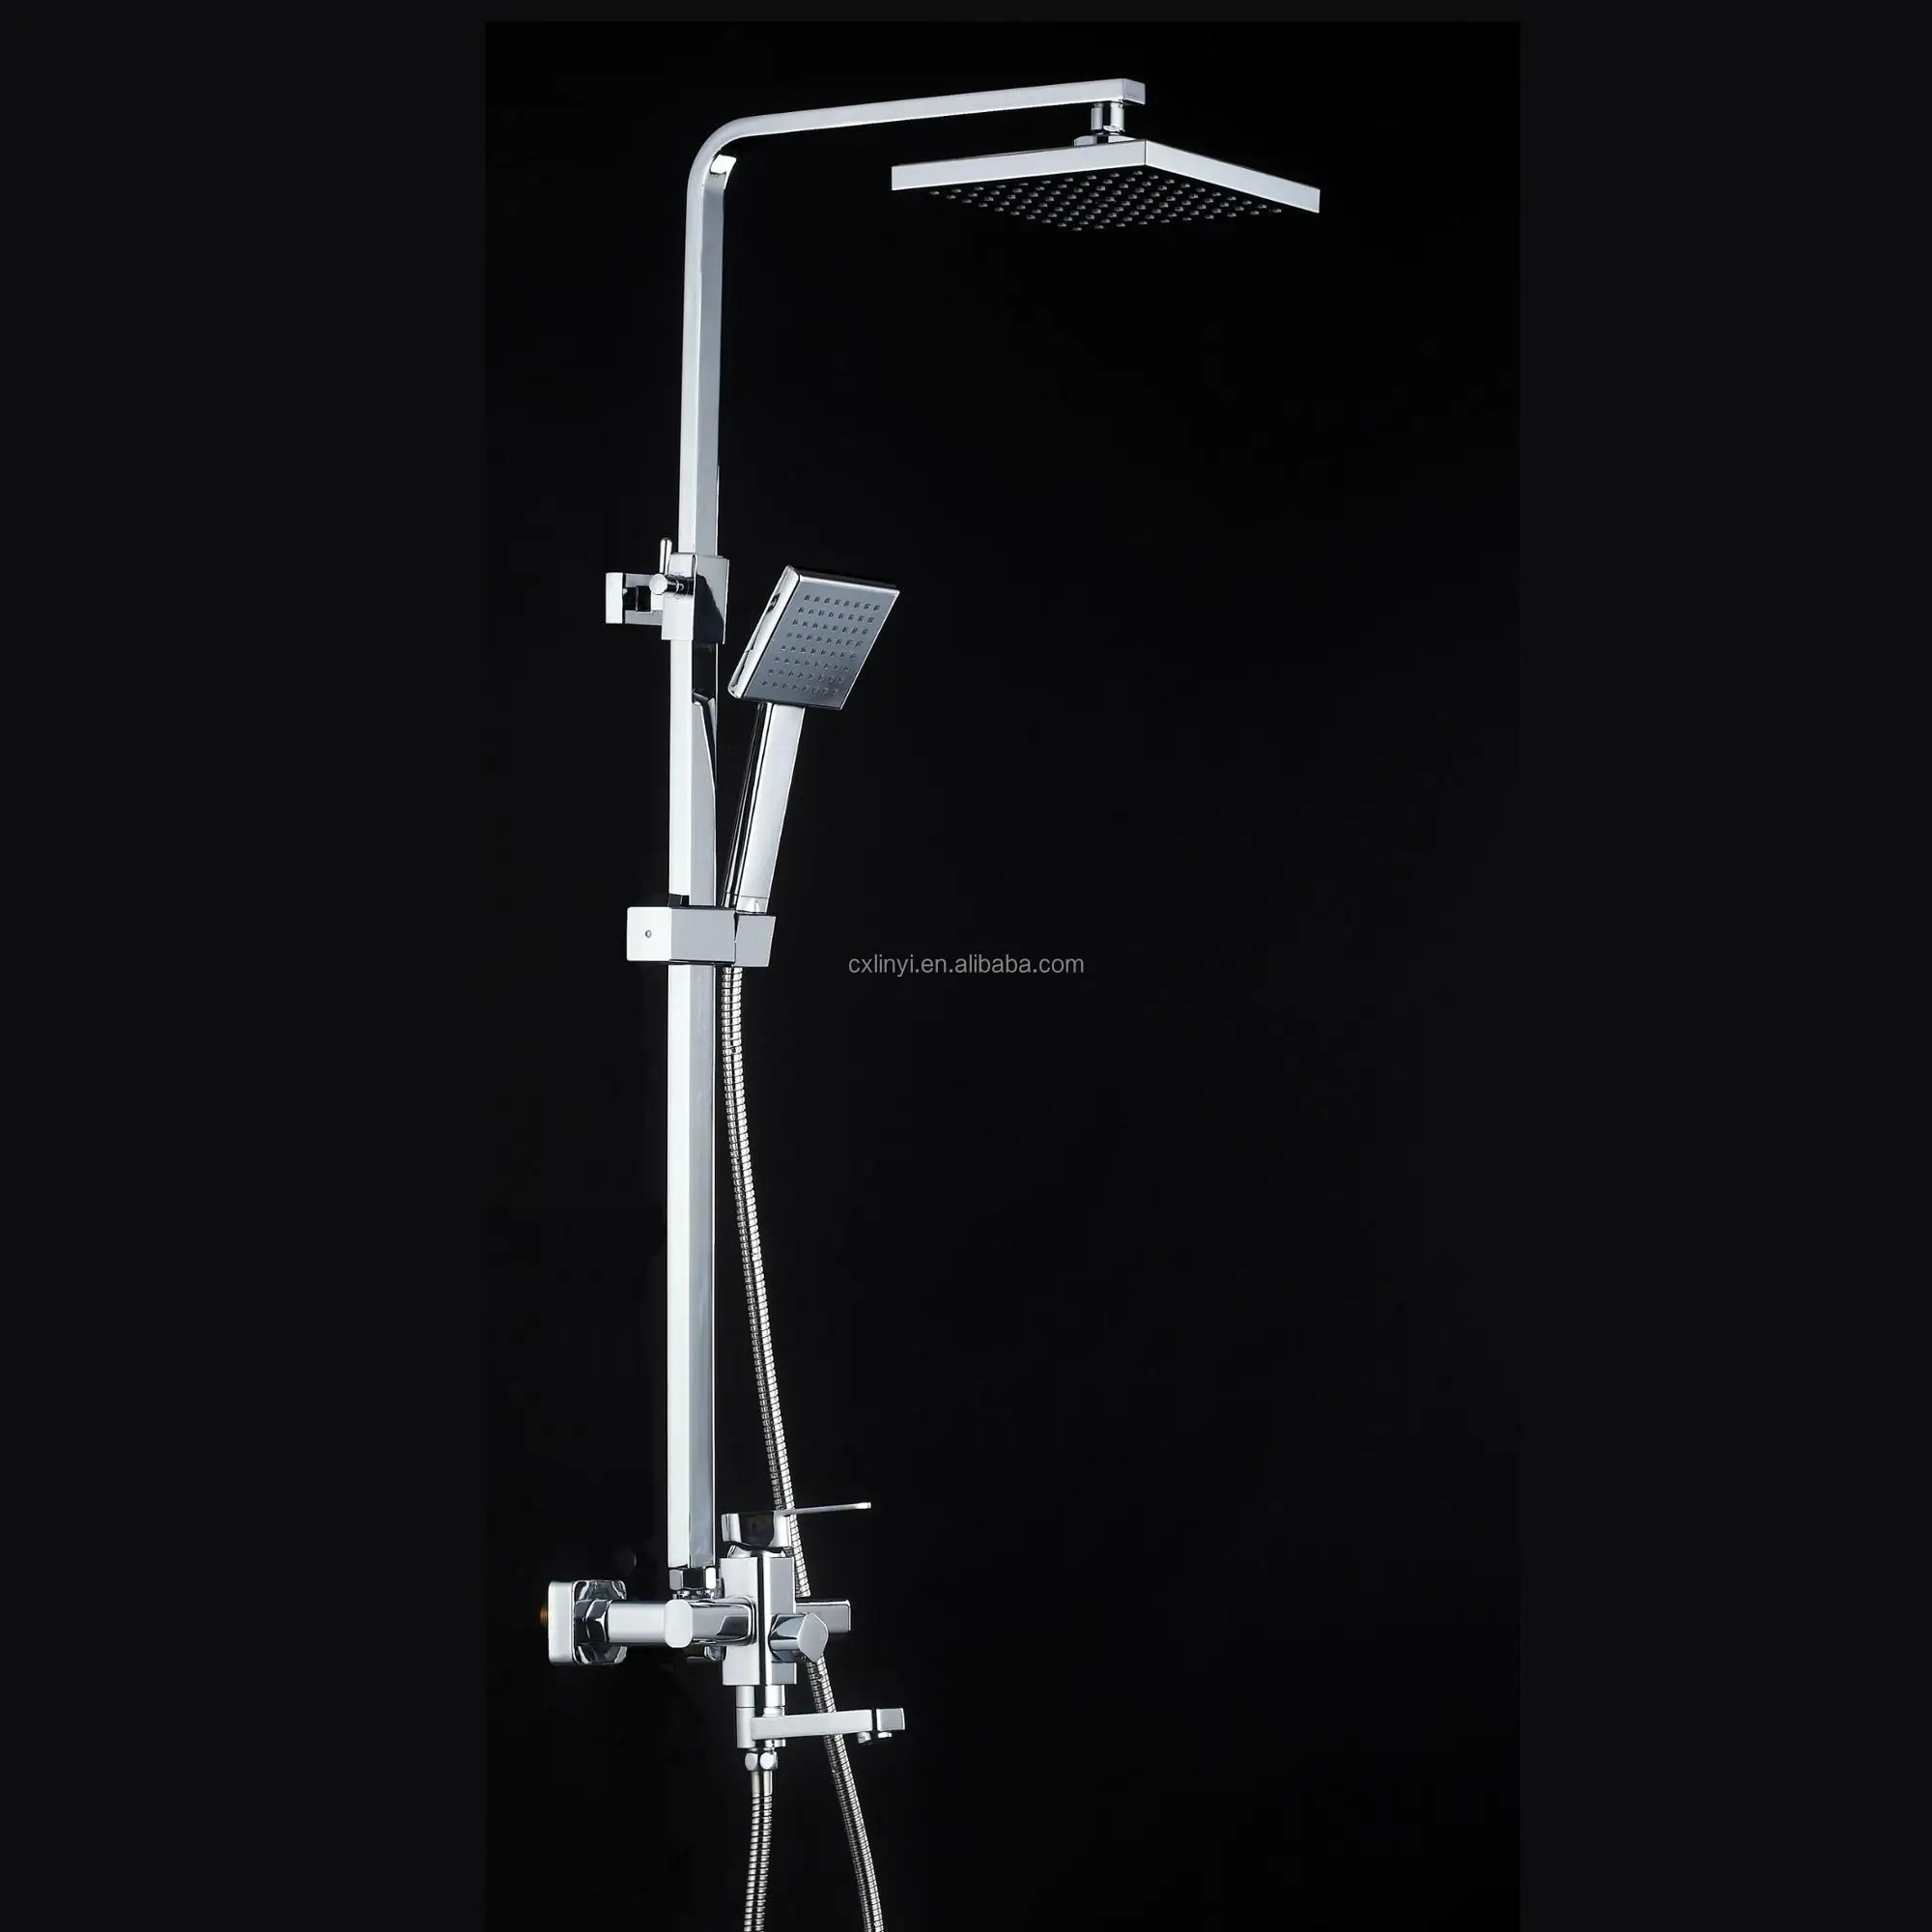 China Sanitary Ware Supplier Hot Selling Extensible Stainless